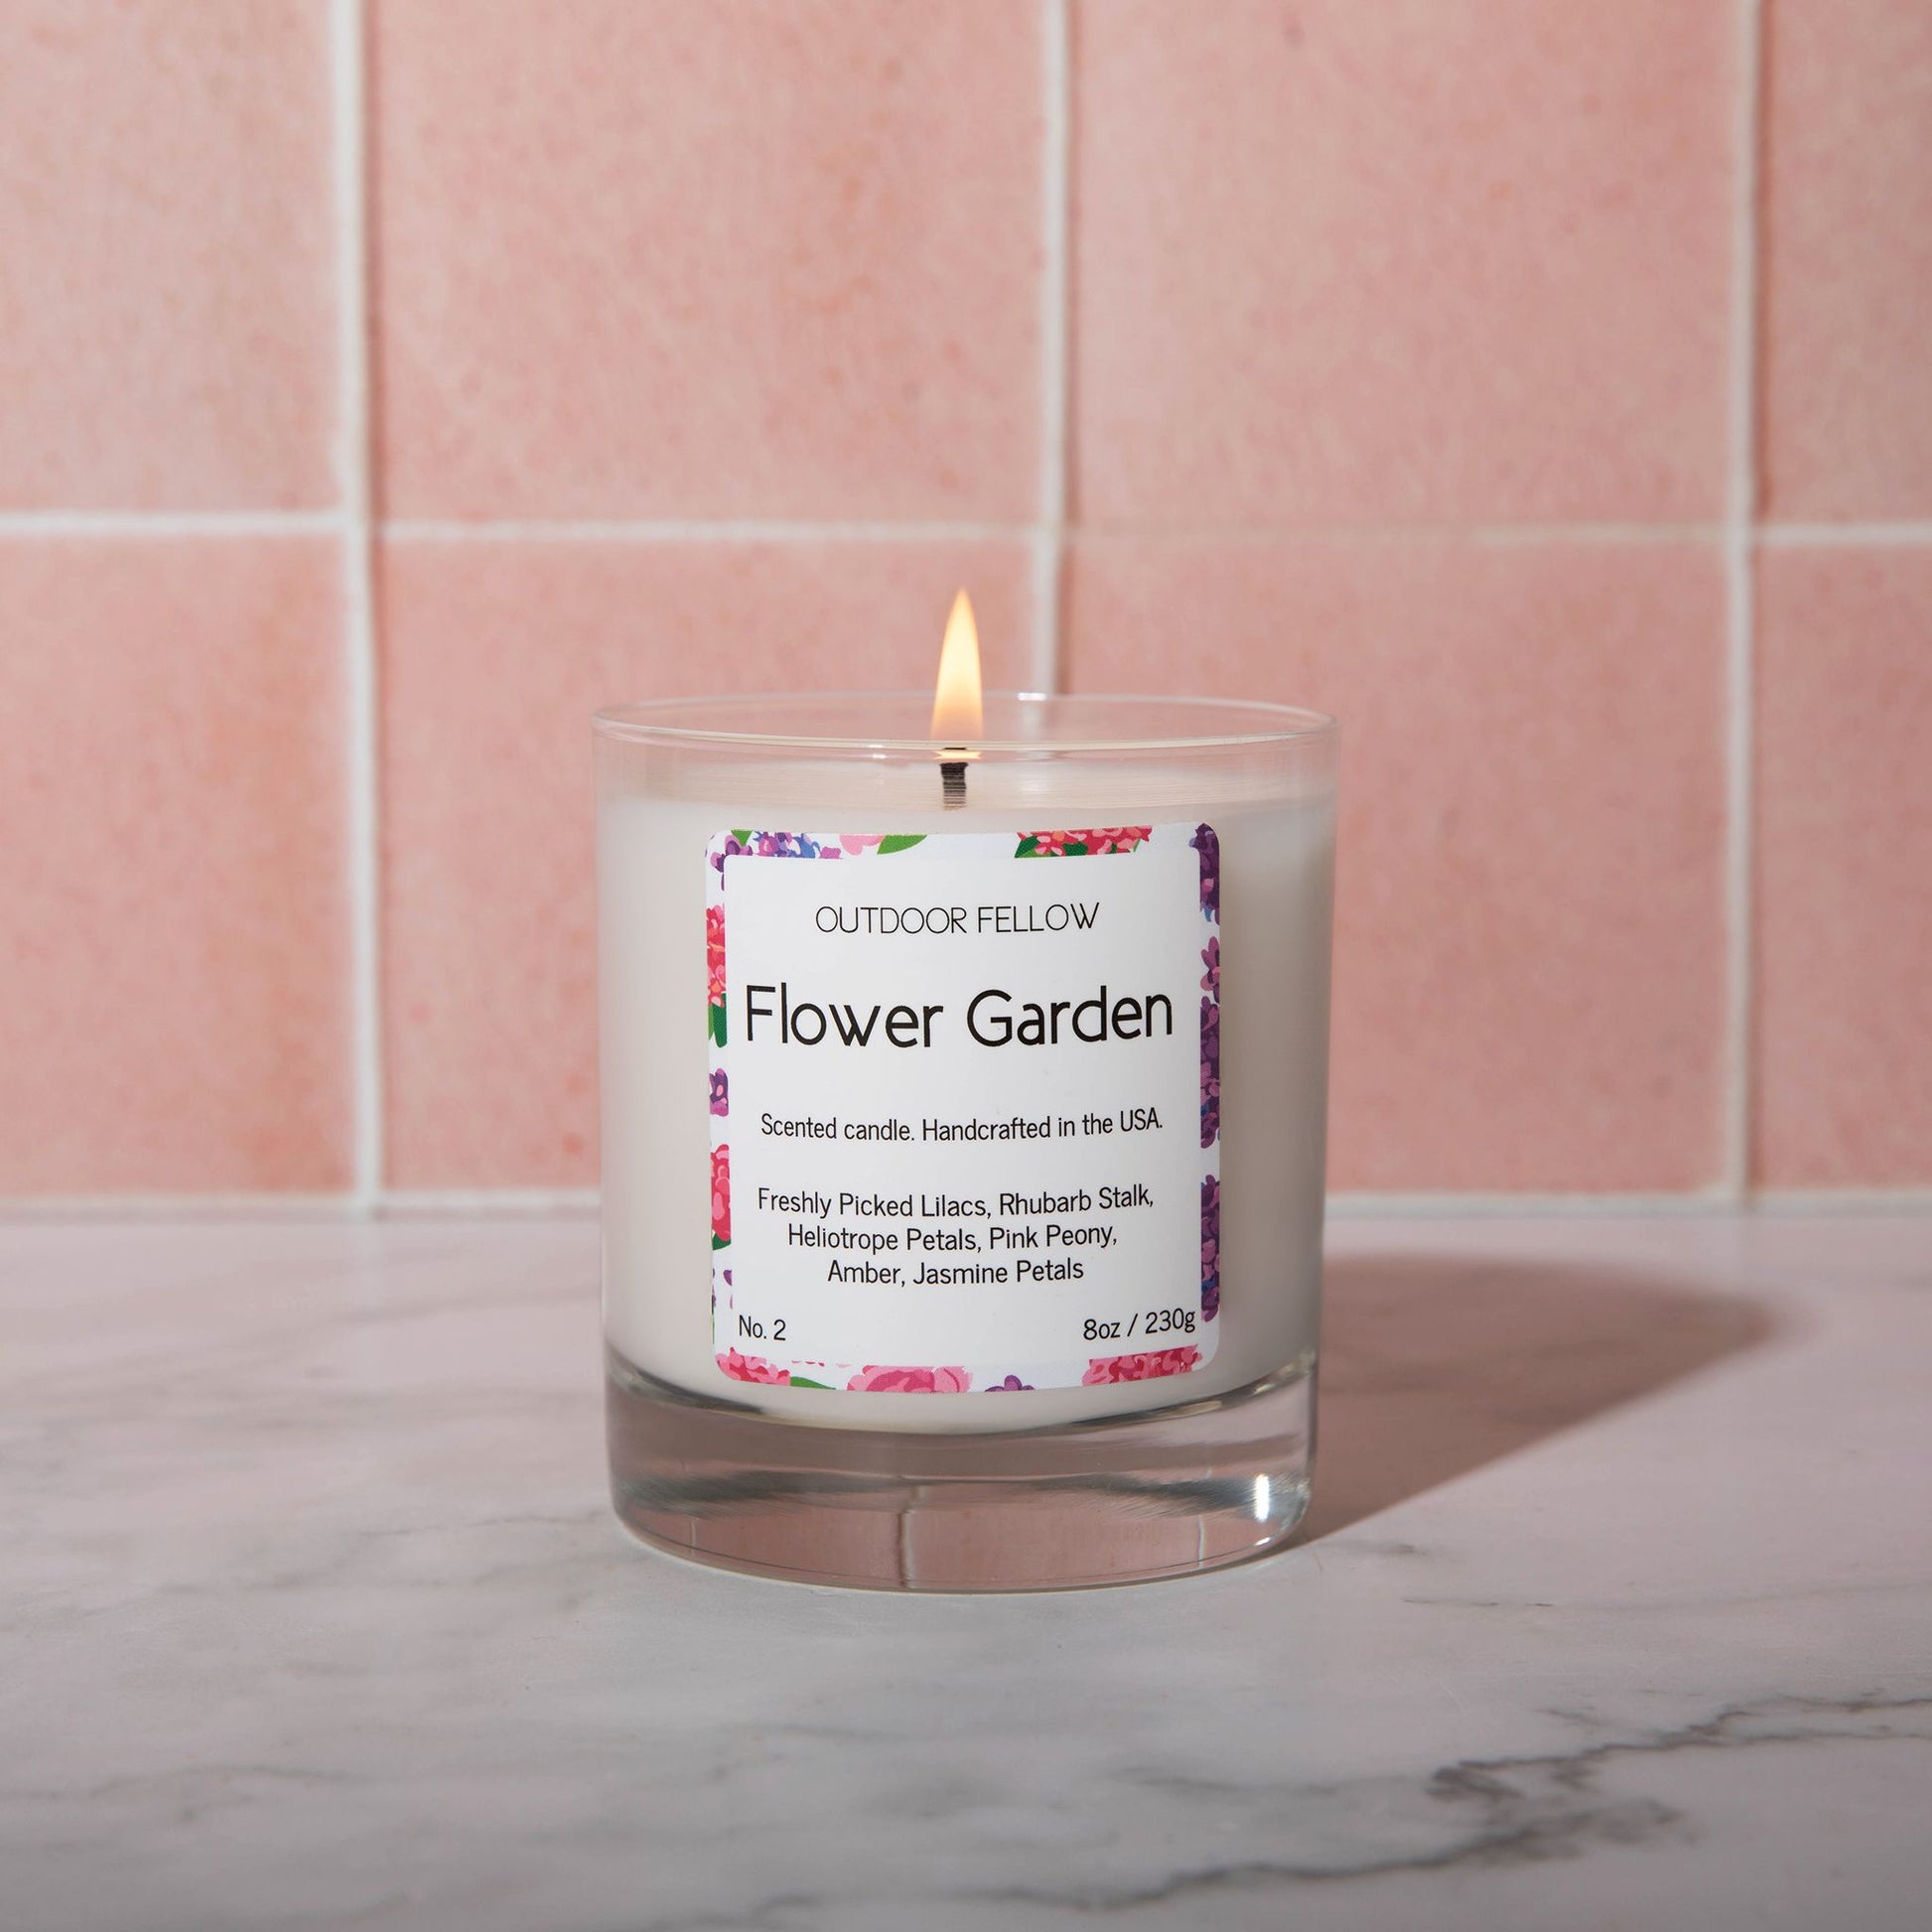 A lit Flower Garden scented candle on a marble surface with a pink tile background